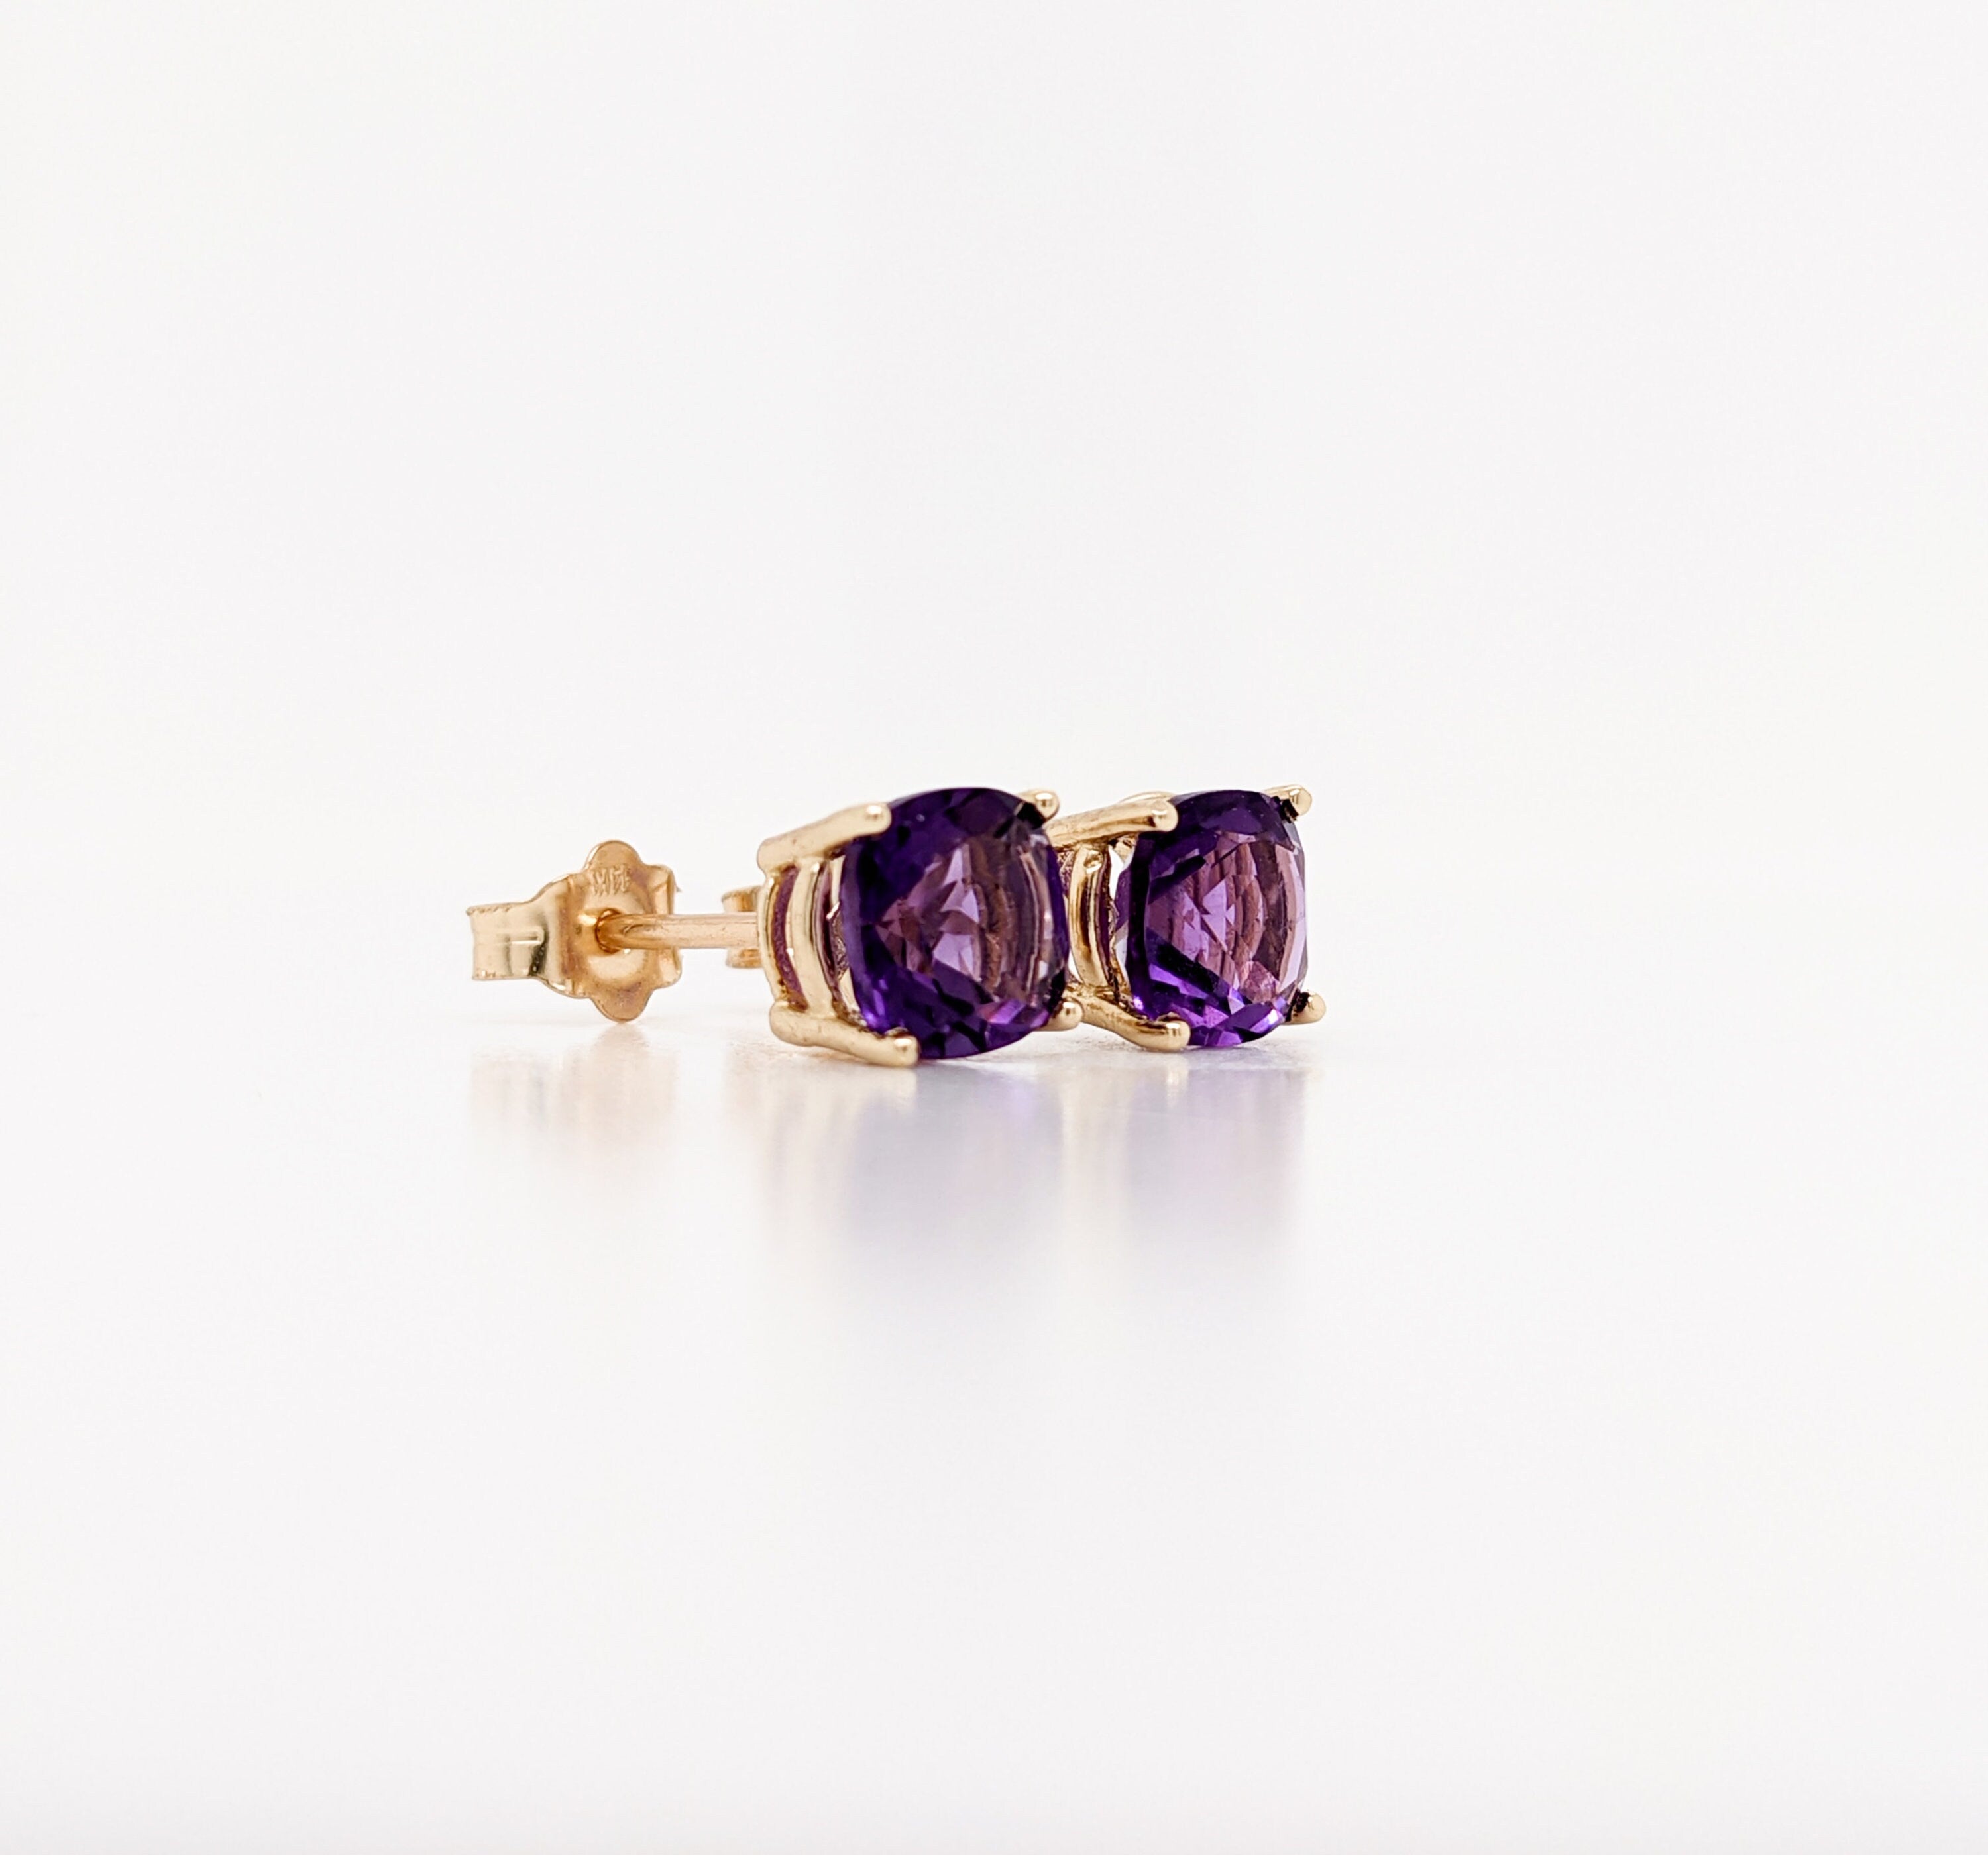 Amethyst Studs in Solid 14K White, Yellow or Rose Gold | Cushion 6mm | February Birthstone | Minimalist Solitaire Earrings